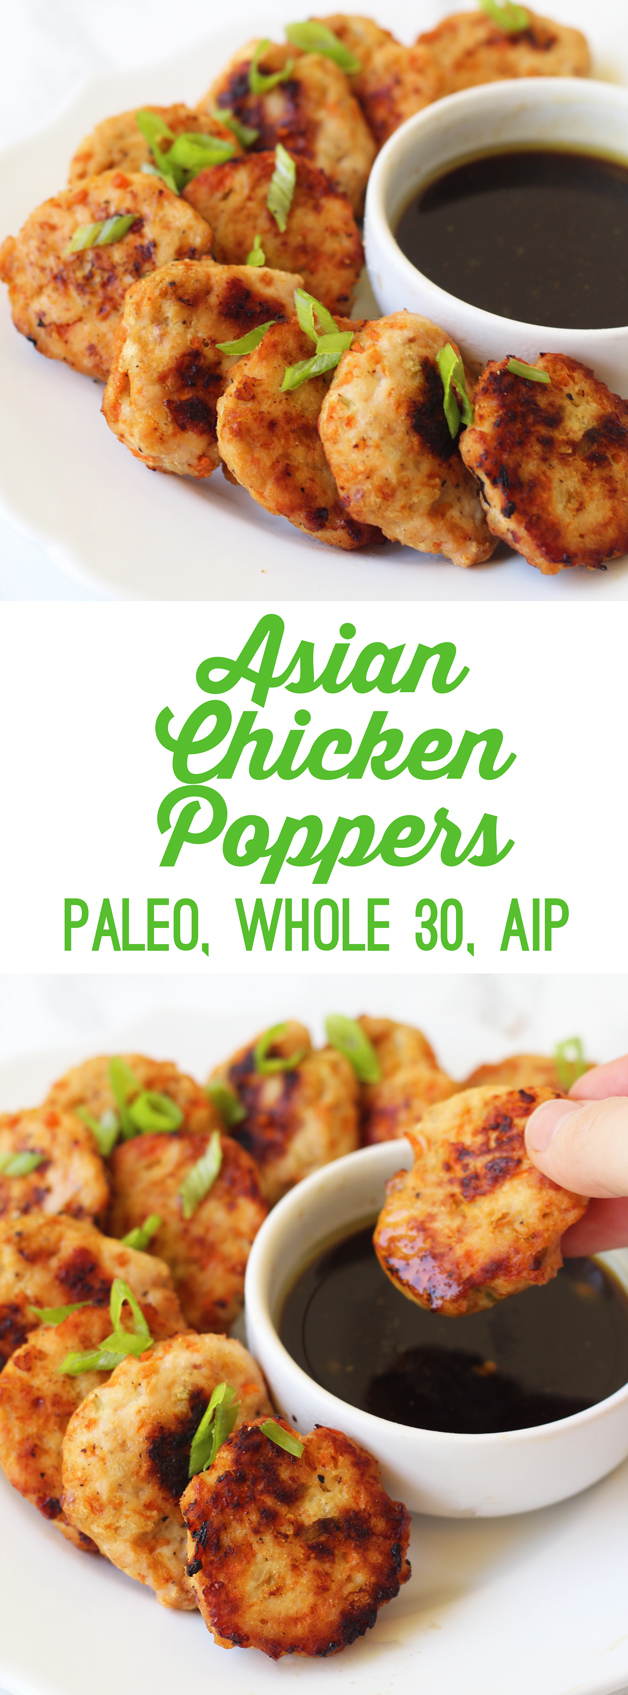 Asian Chicken Poppers (Paleo, Whole 30, AIP)